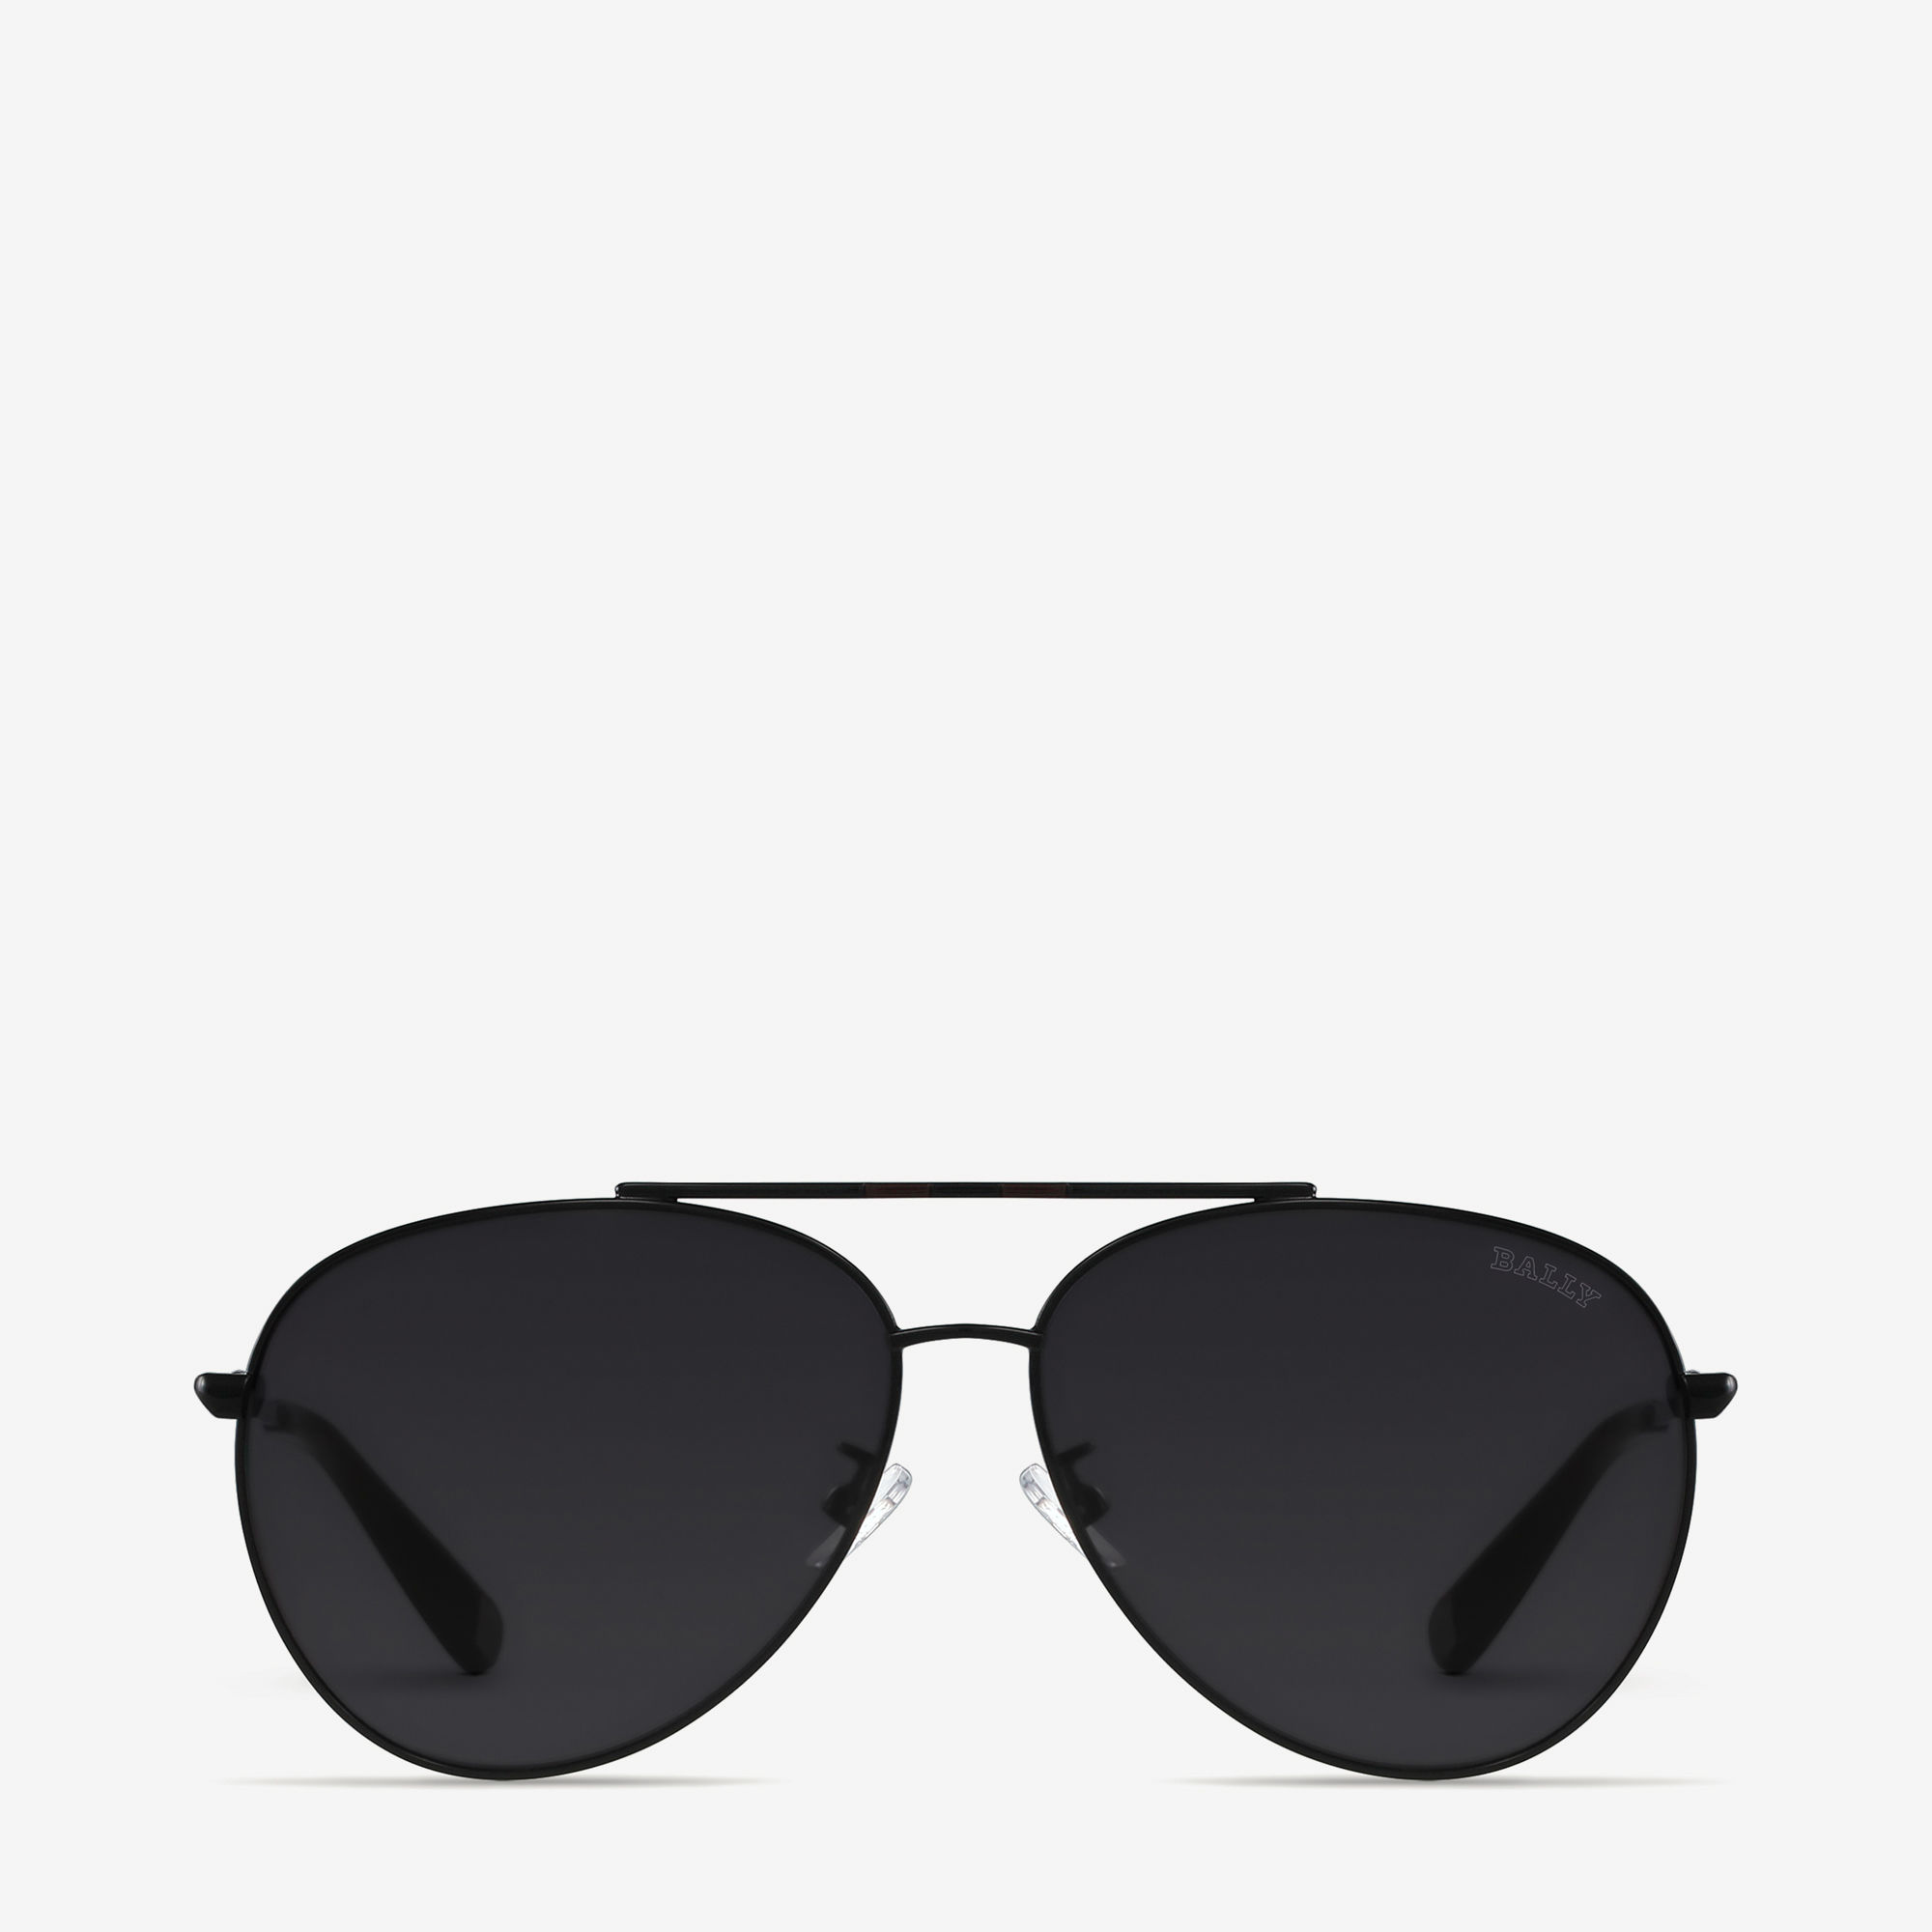 Black And White Sunglasses Free Download On Clipartmag